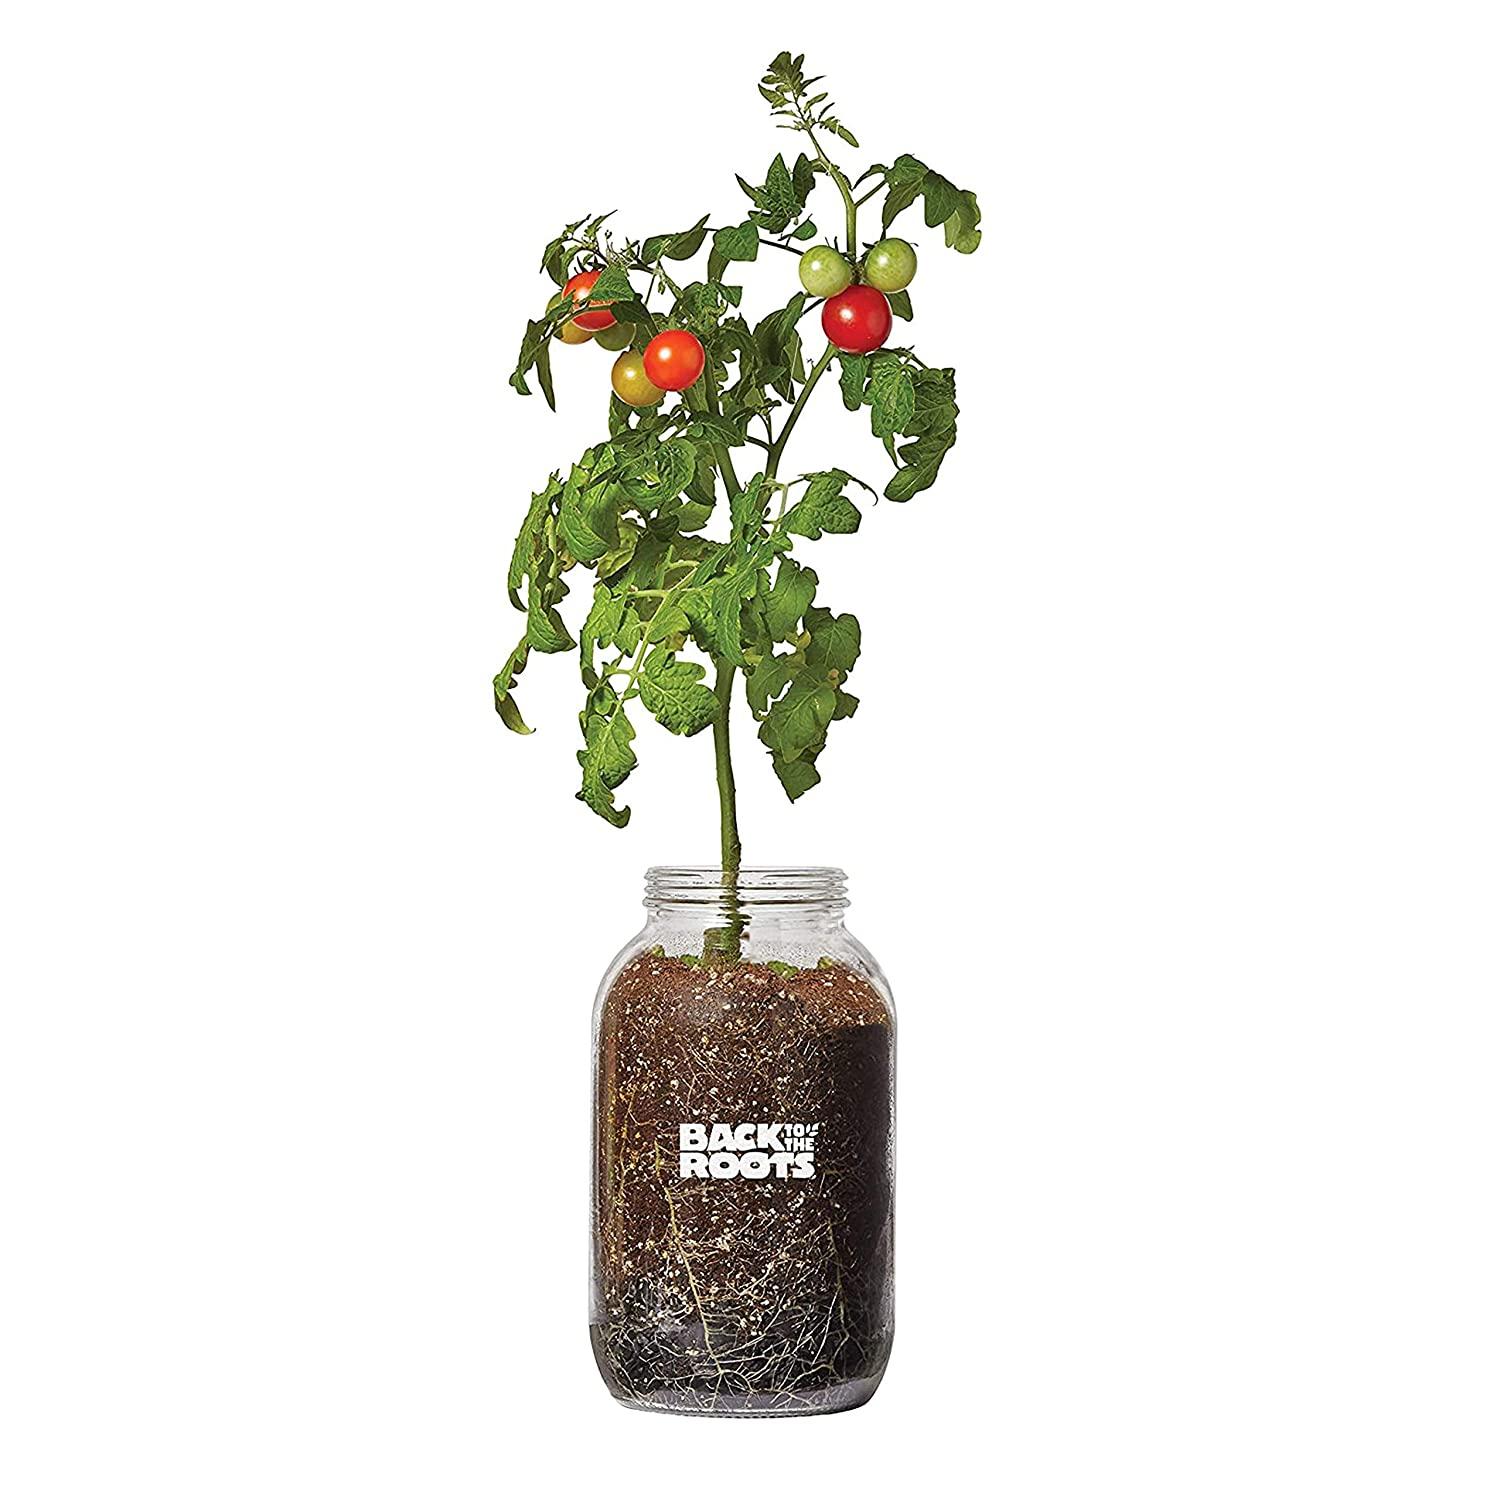 Back to the Roots Cherry Tomato Organic Windowsill Planter Kit for $8.77